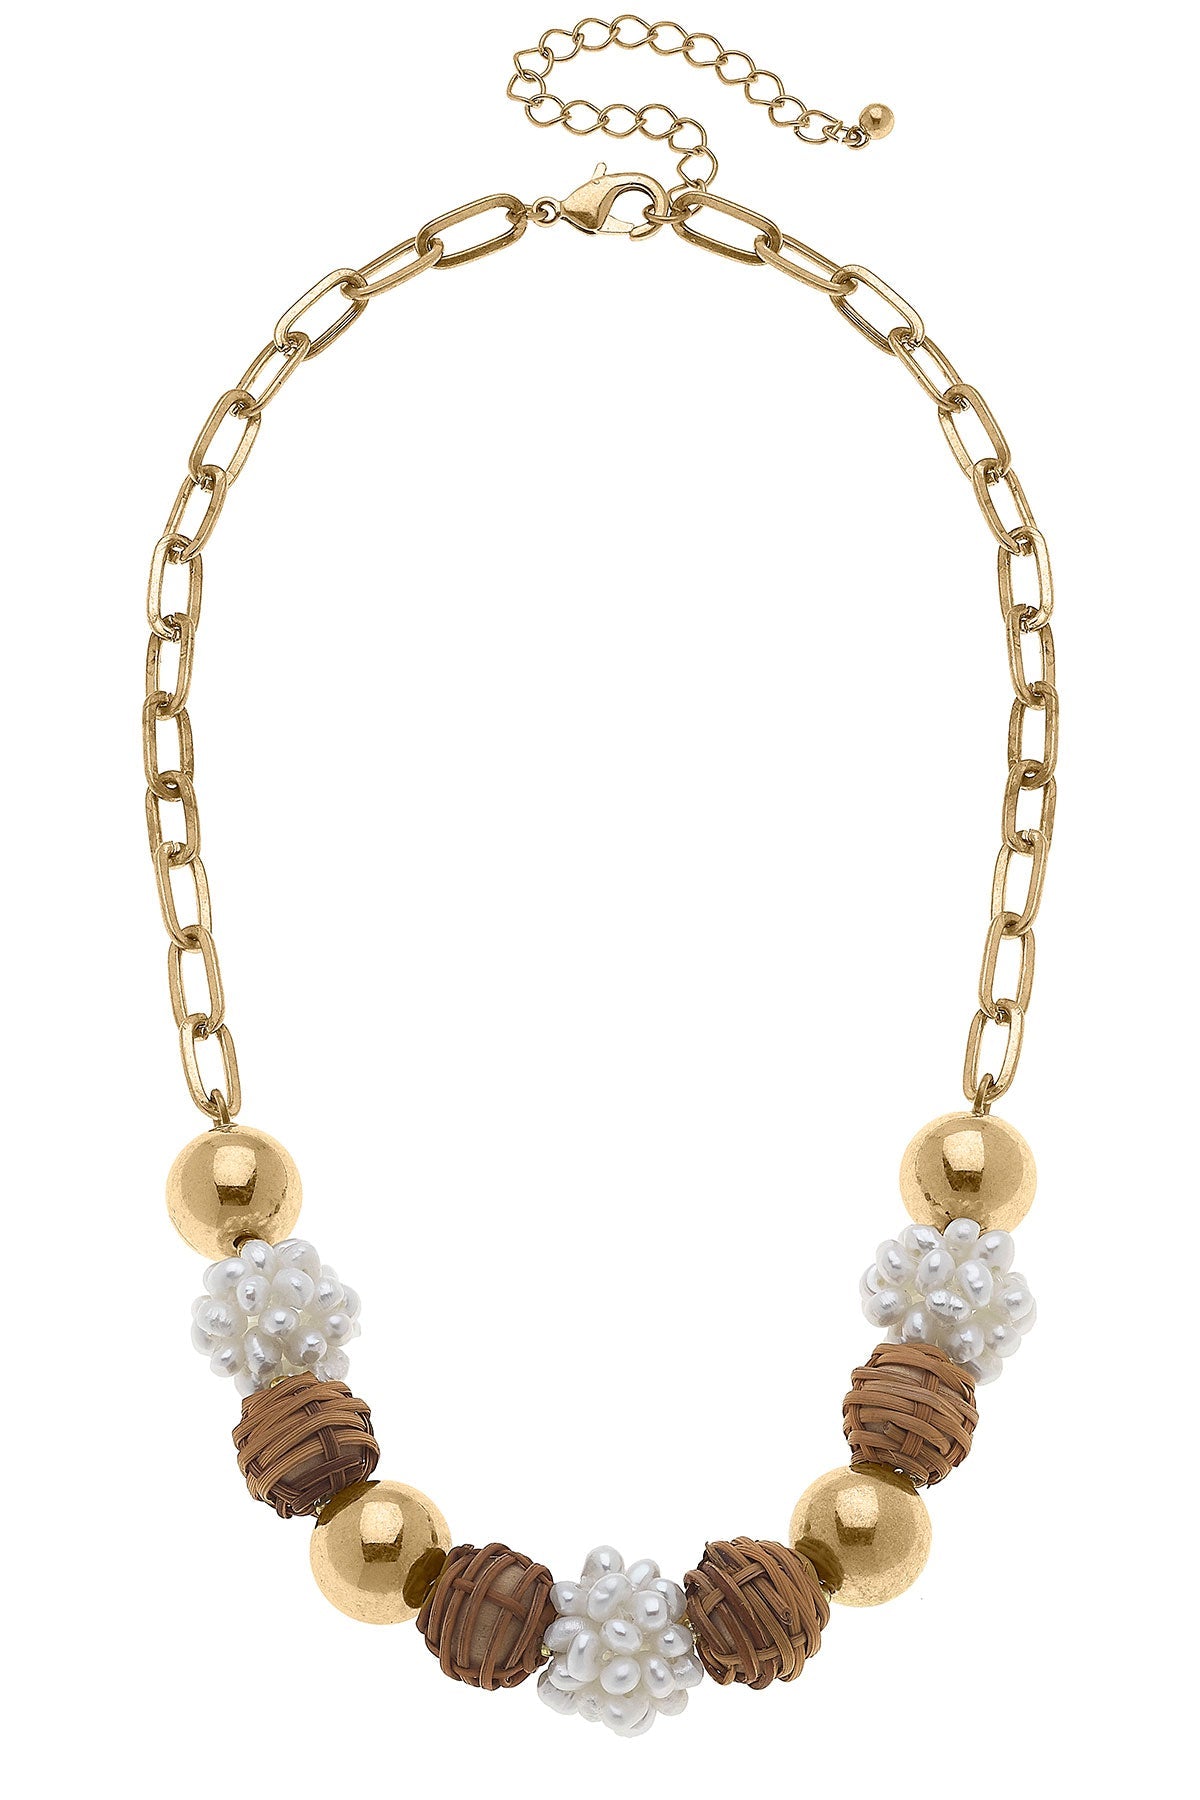 Bella Pearl Cluster & Wicker Ball Bead Necklace in Brown